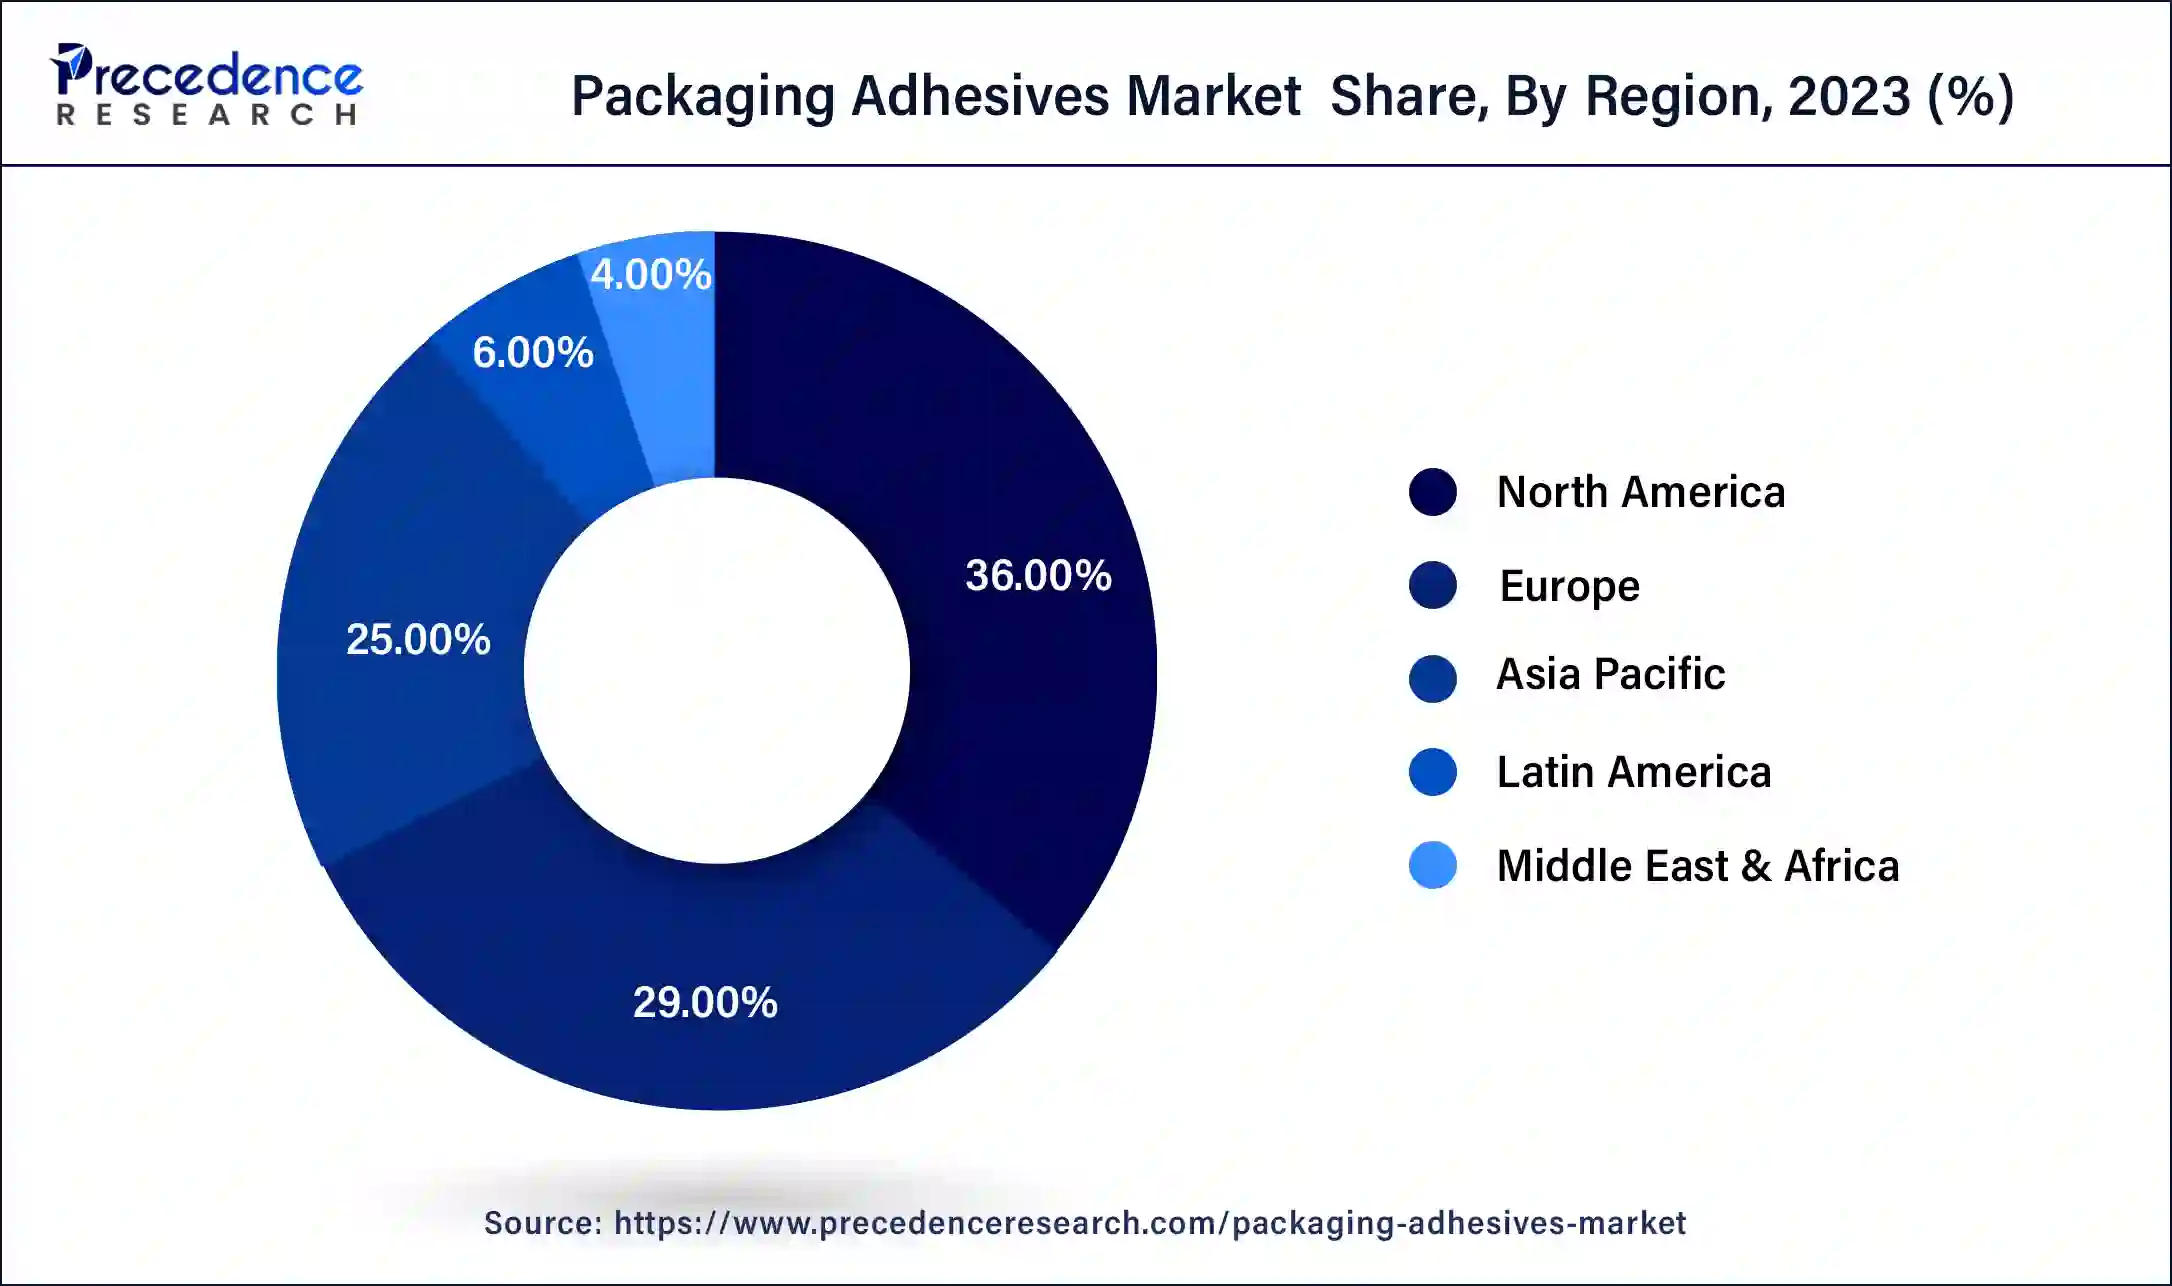 Packaging Adhesives Market Share, By Region, 2023 (%)